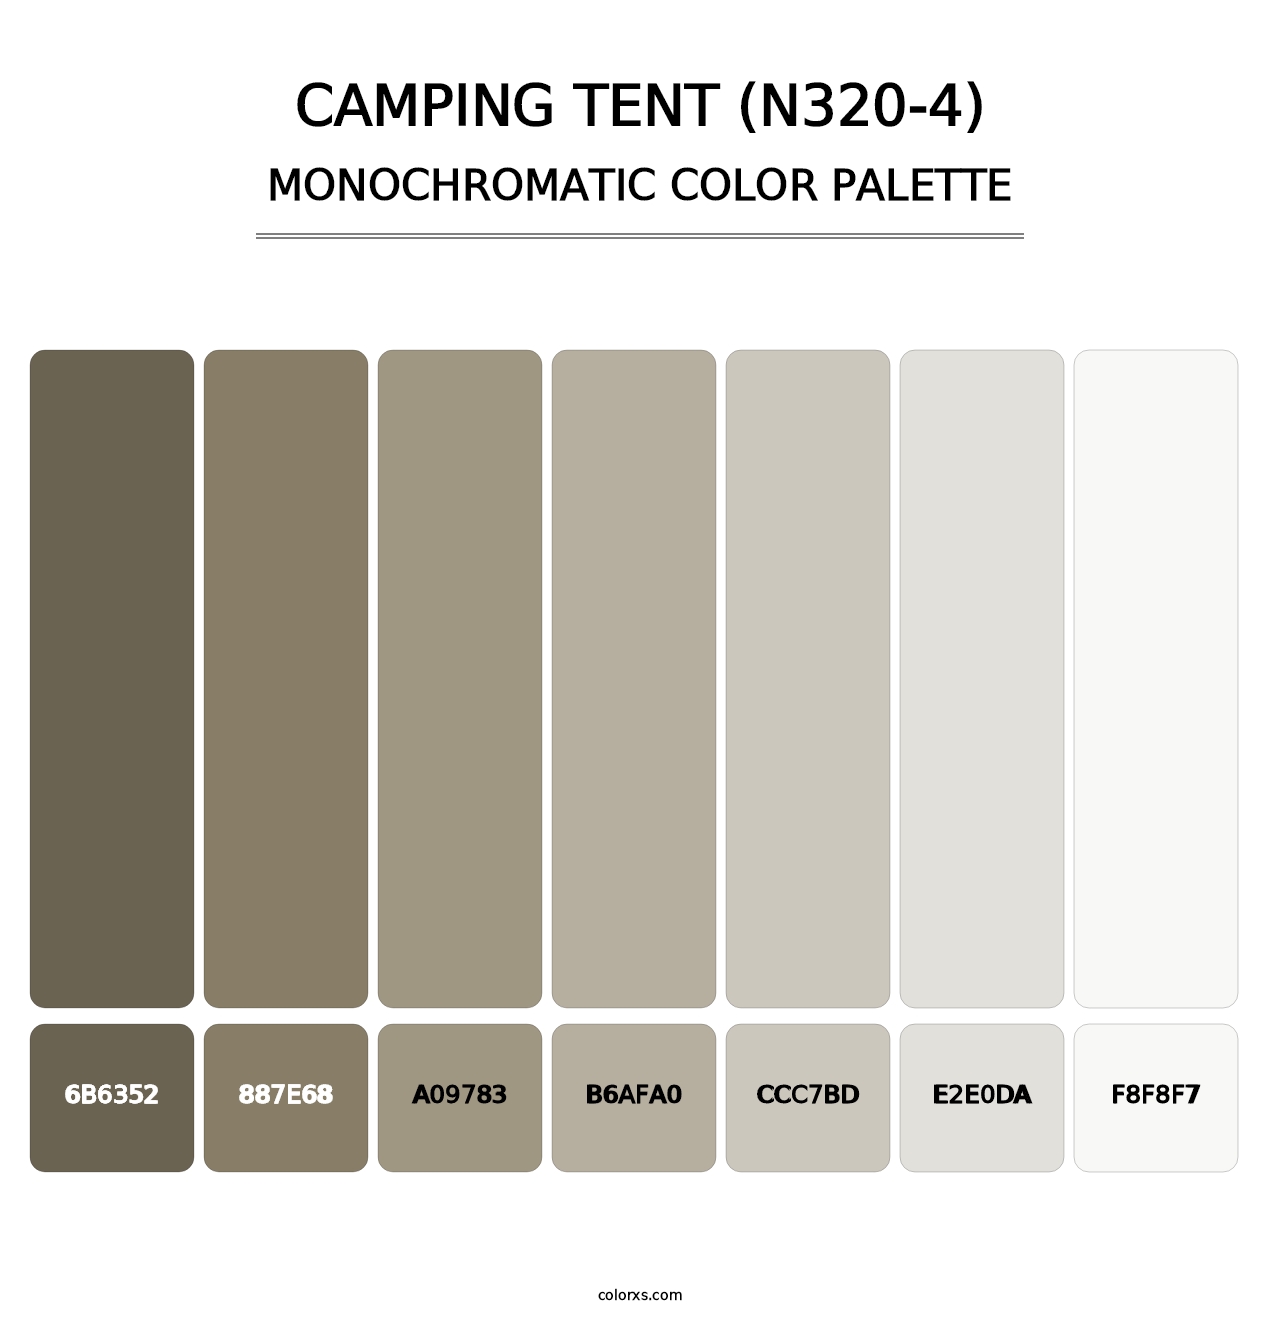 Camping Tent (N320-4) - Monochromatic Color Palette